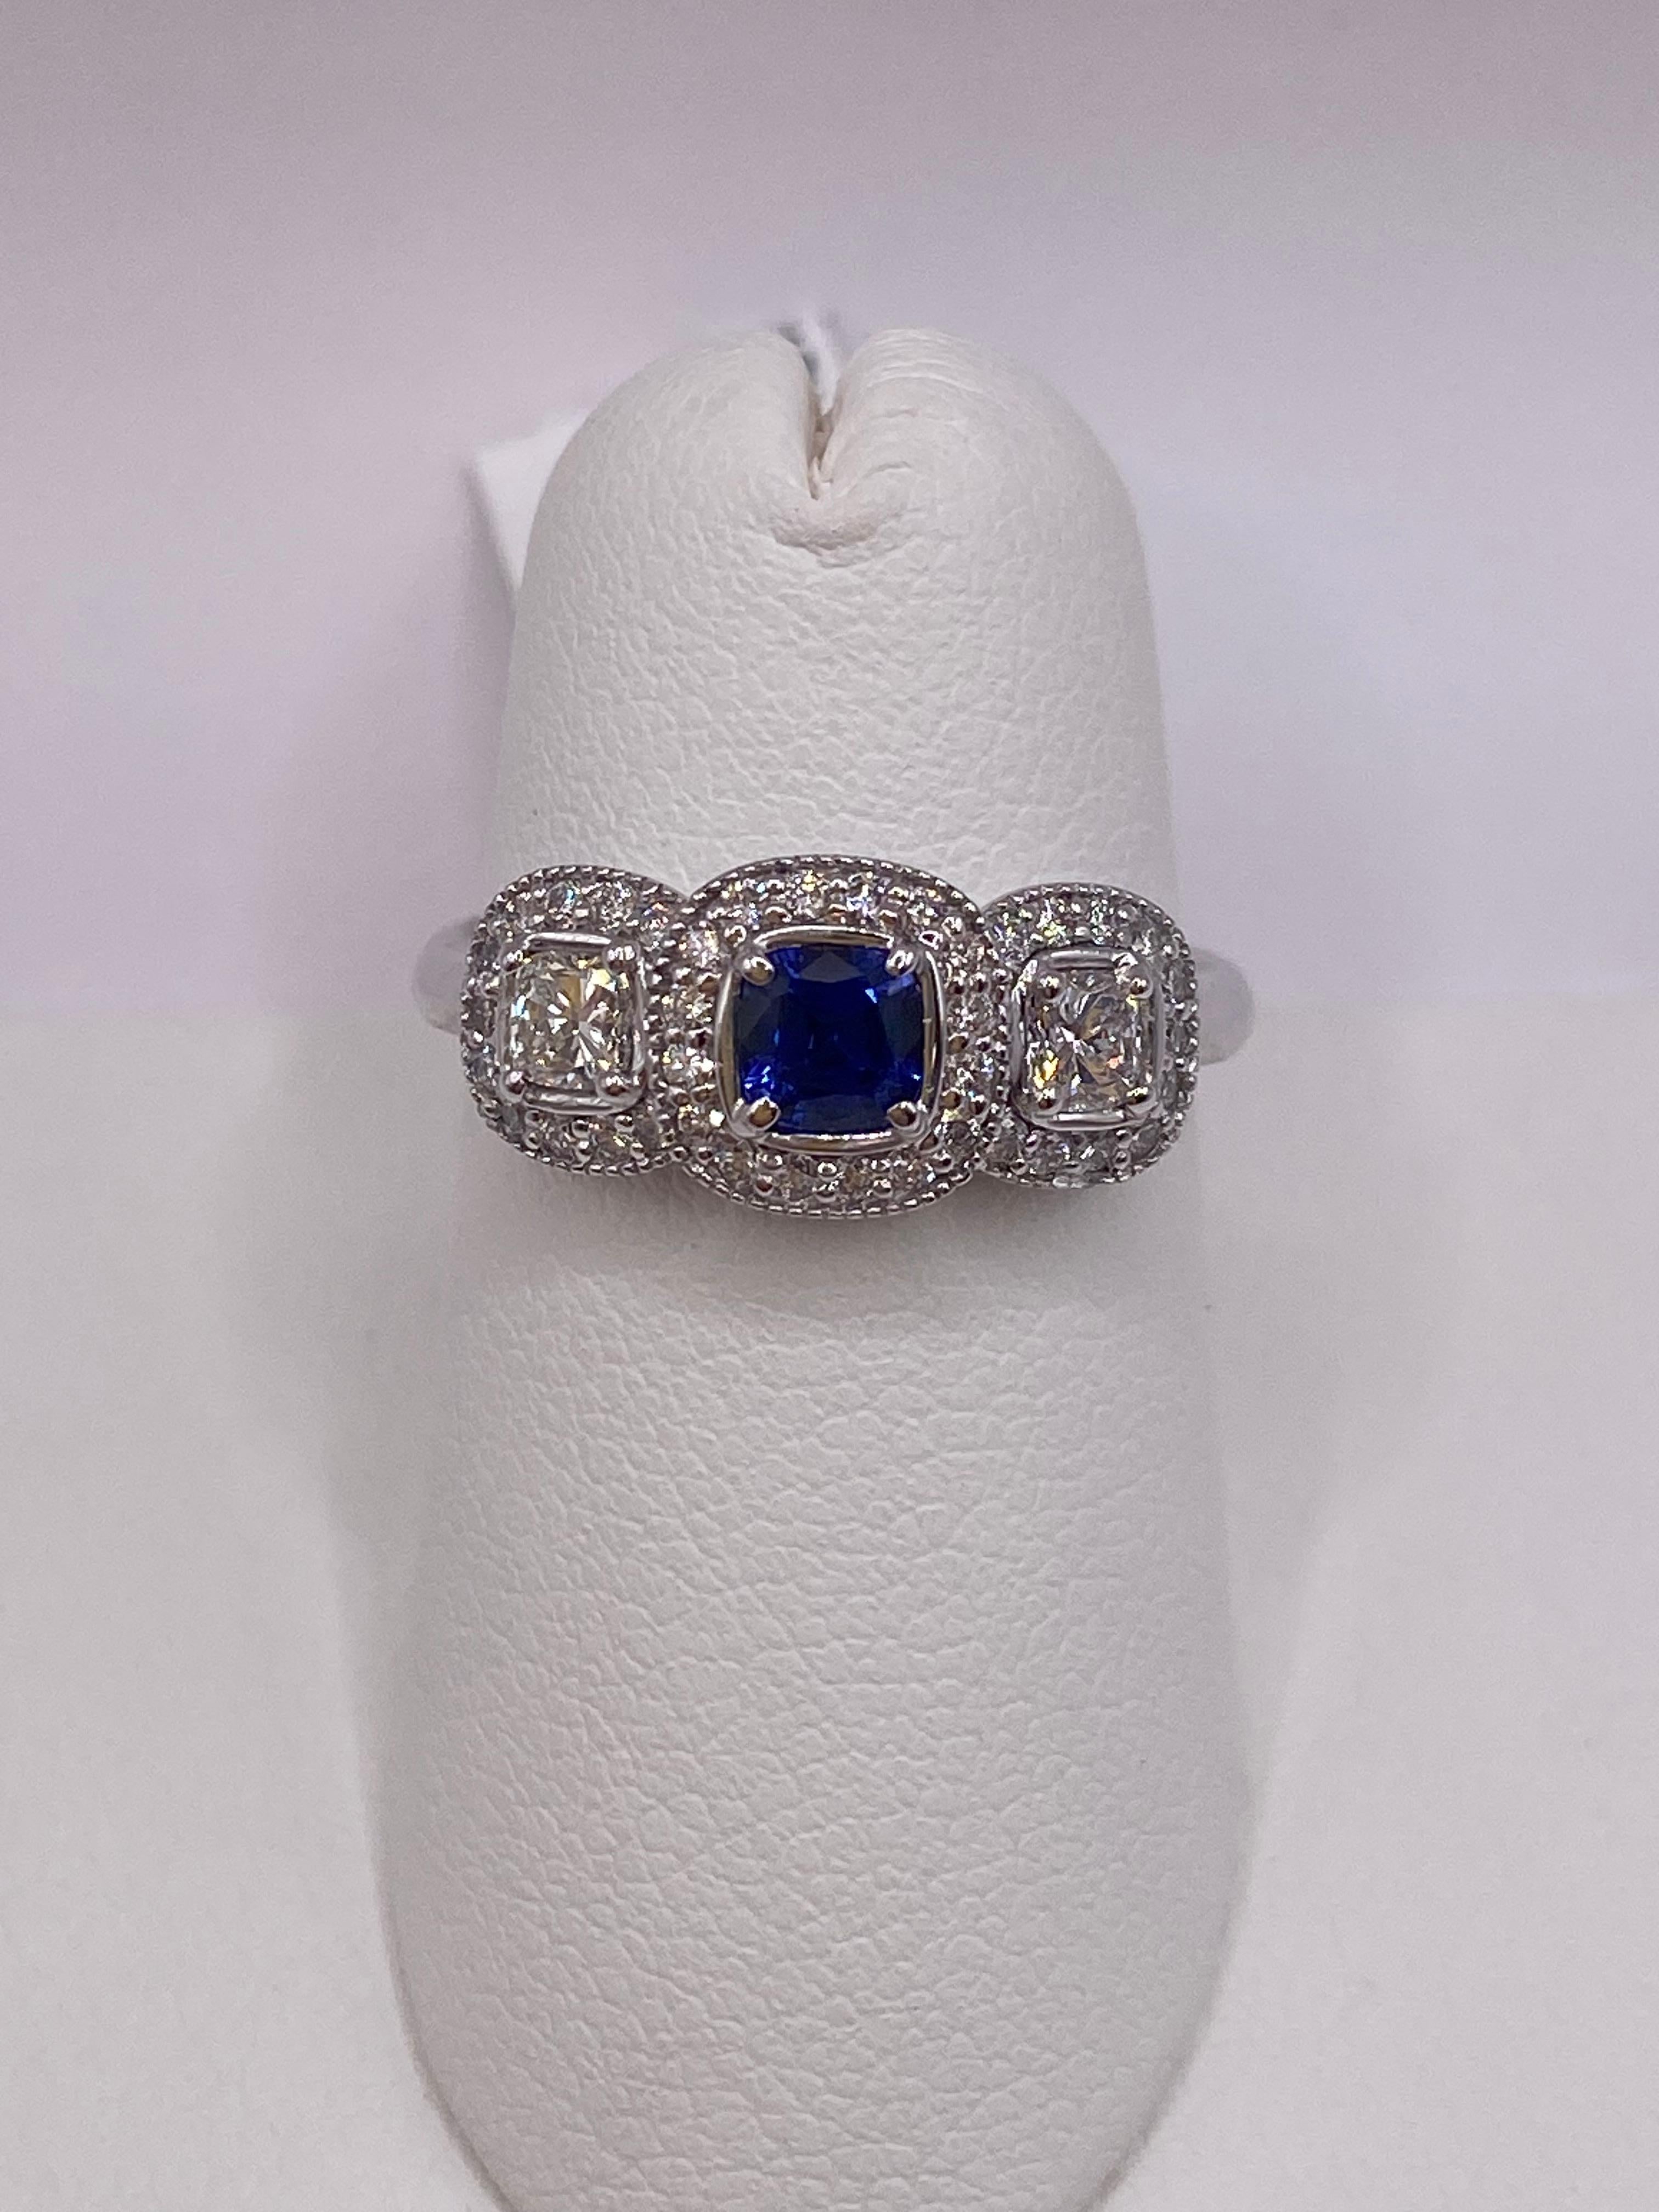 18KT White Gold
Ring Size 6.5
(ring is size 6.5 but is sizable upon request)

Number of Cushion Cut Sapphires: 1
Carat Weight: 0.33ct

Number of Cushion Cut Diamonds: 2
Carat Weight: 0.35ctw

Number of Round Diamonds: 38
Carat Weight: 0.28ctw

This